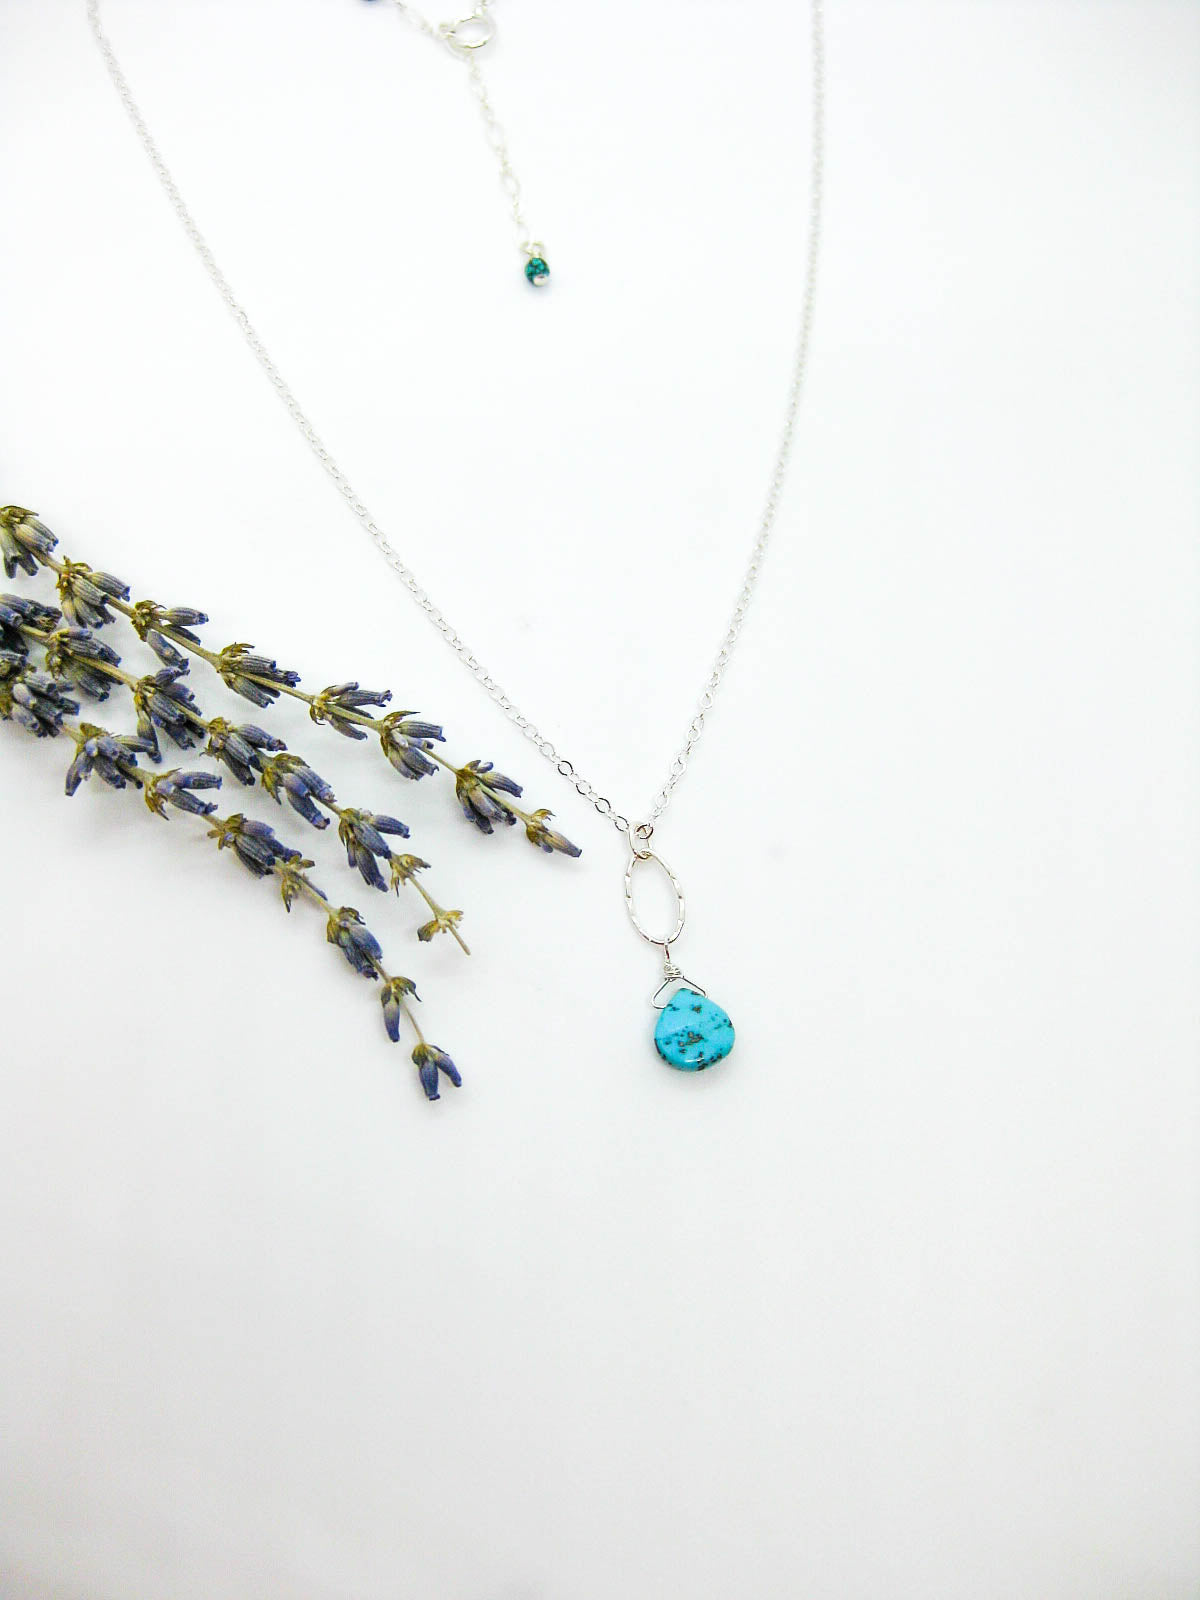 Chrysanthe: Turquoise Necklace - n555